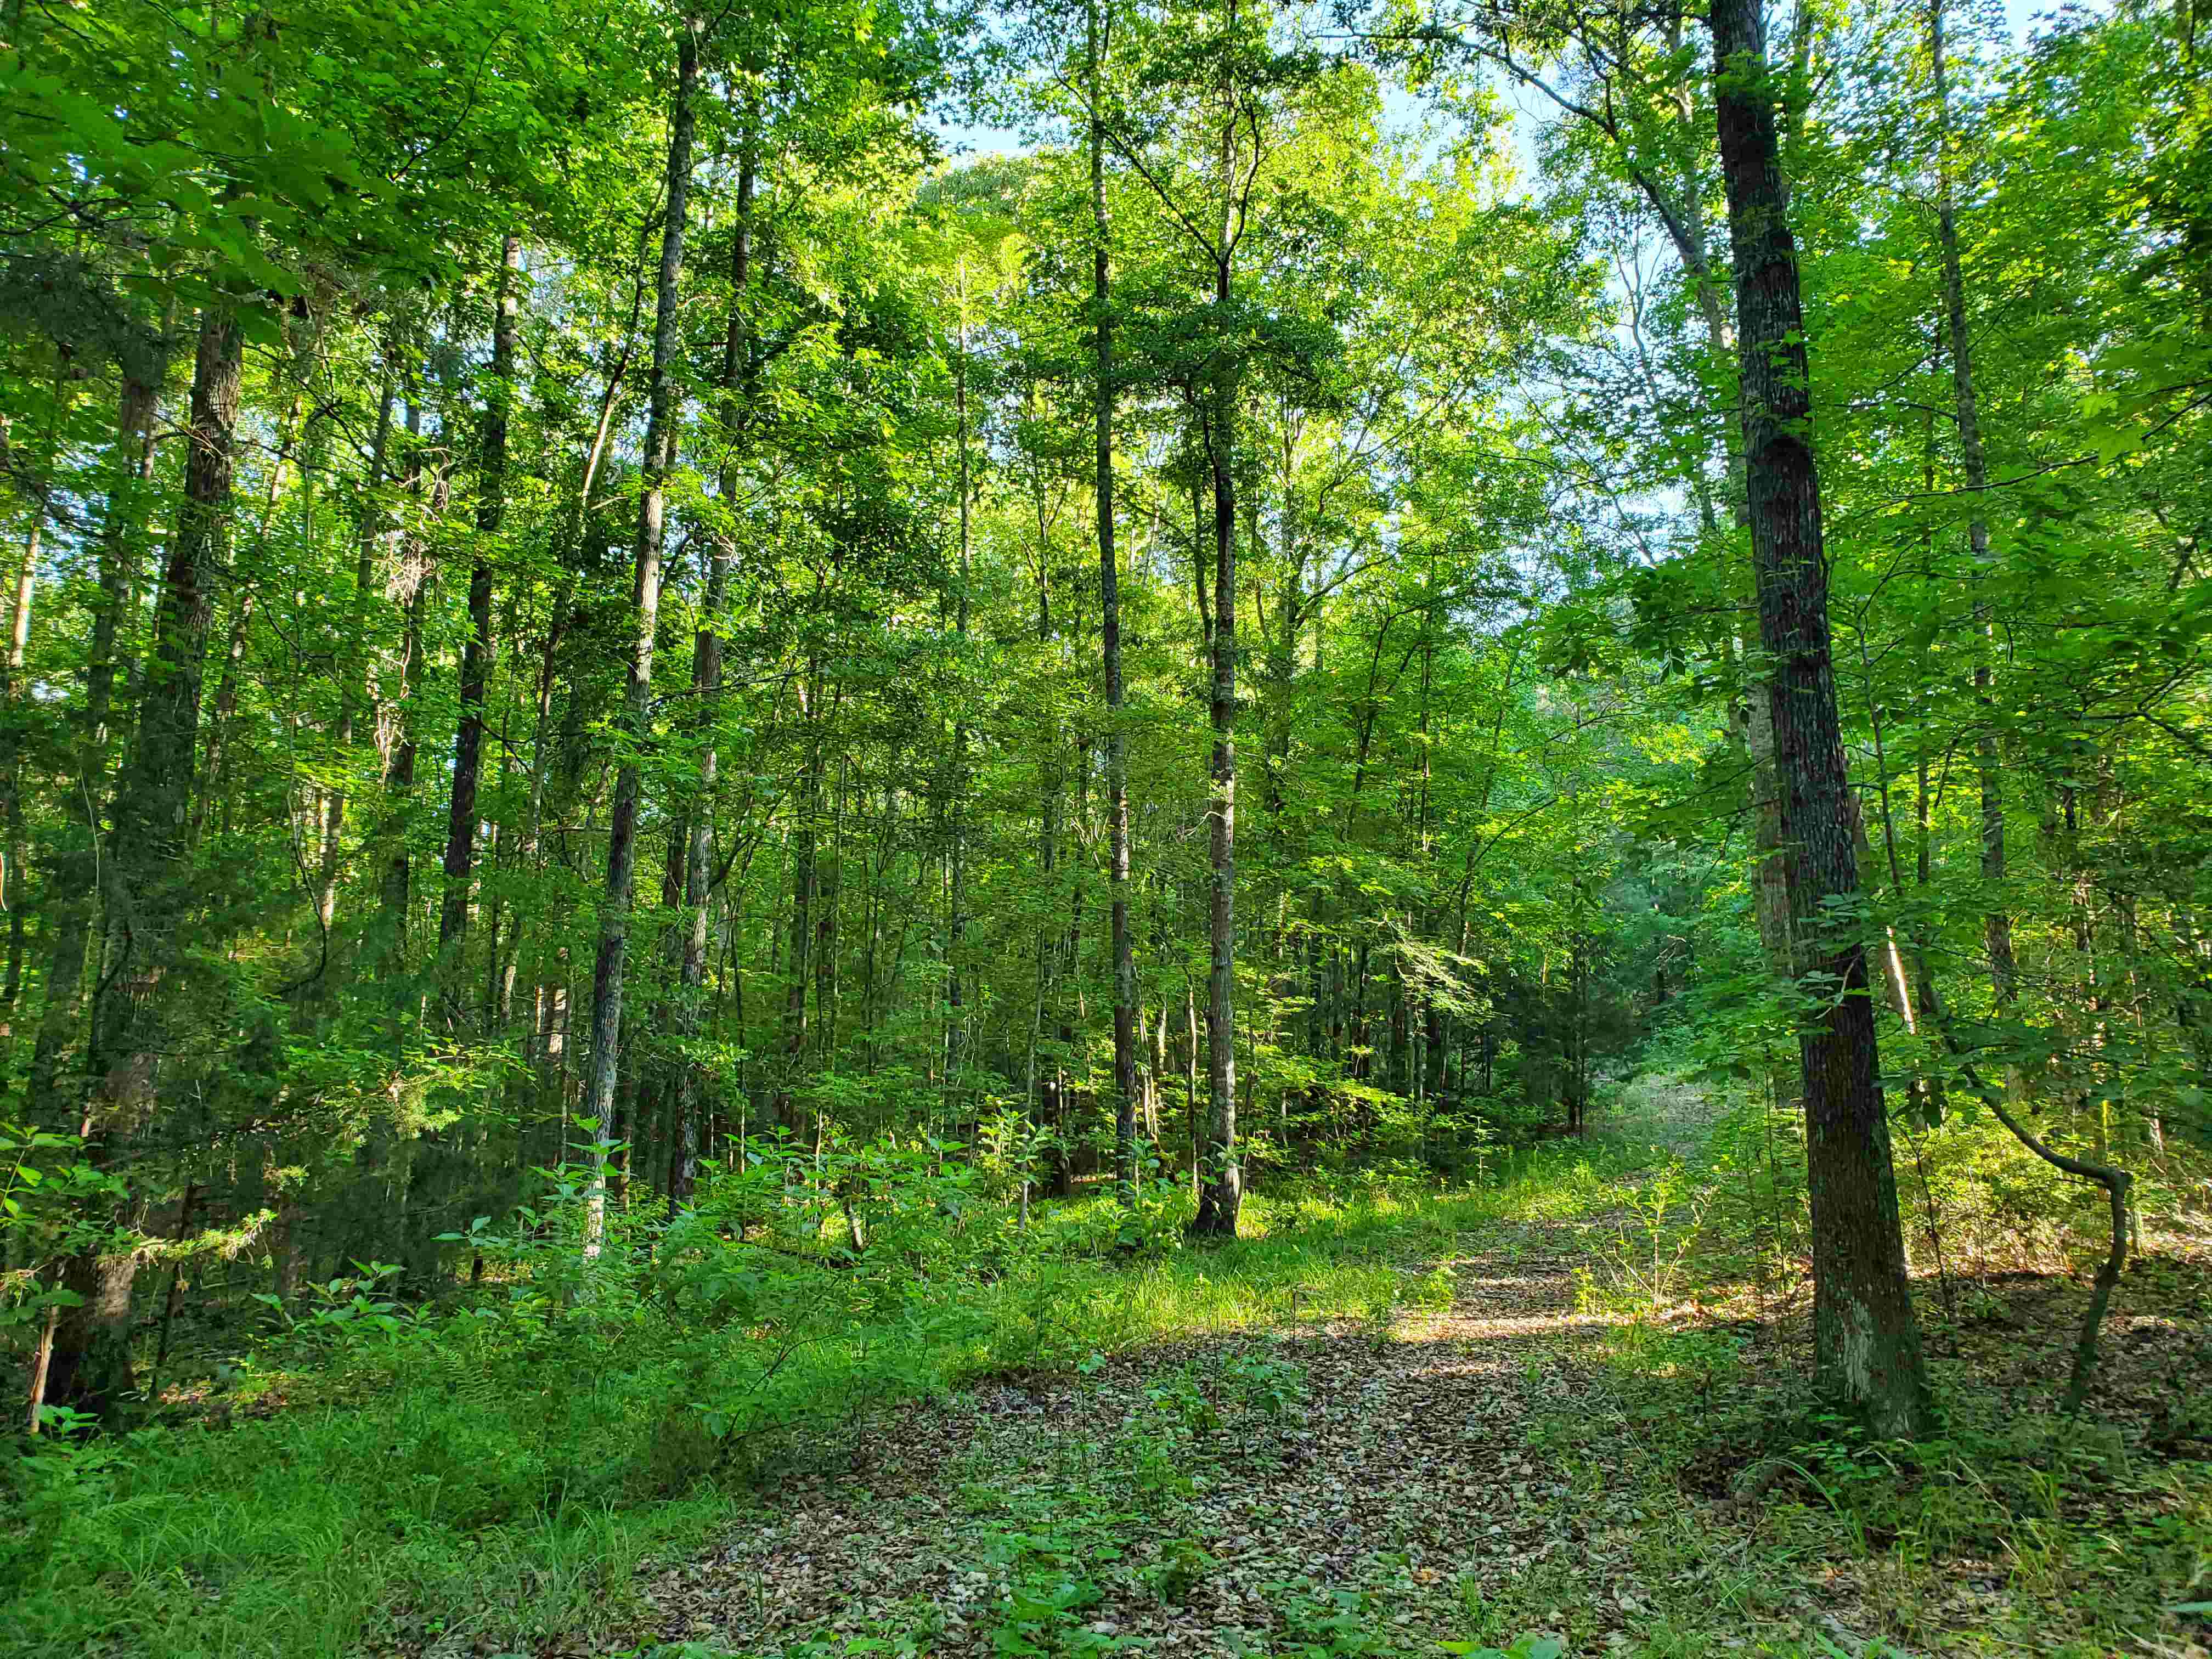 A variety of hardwood trees shade the land